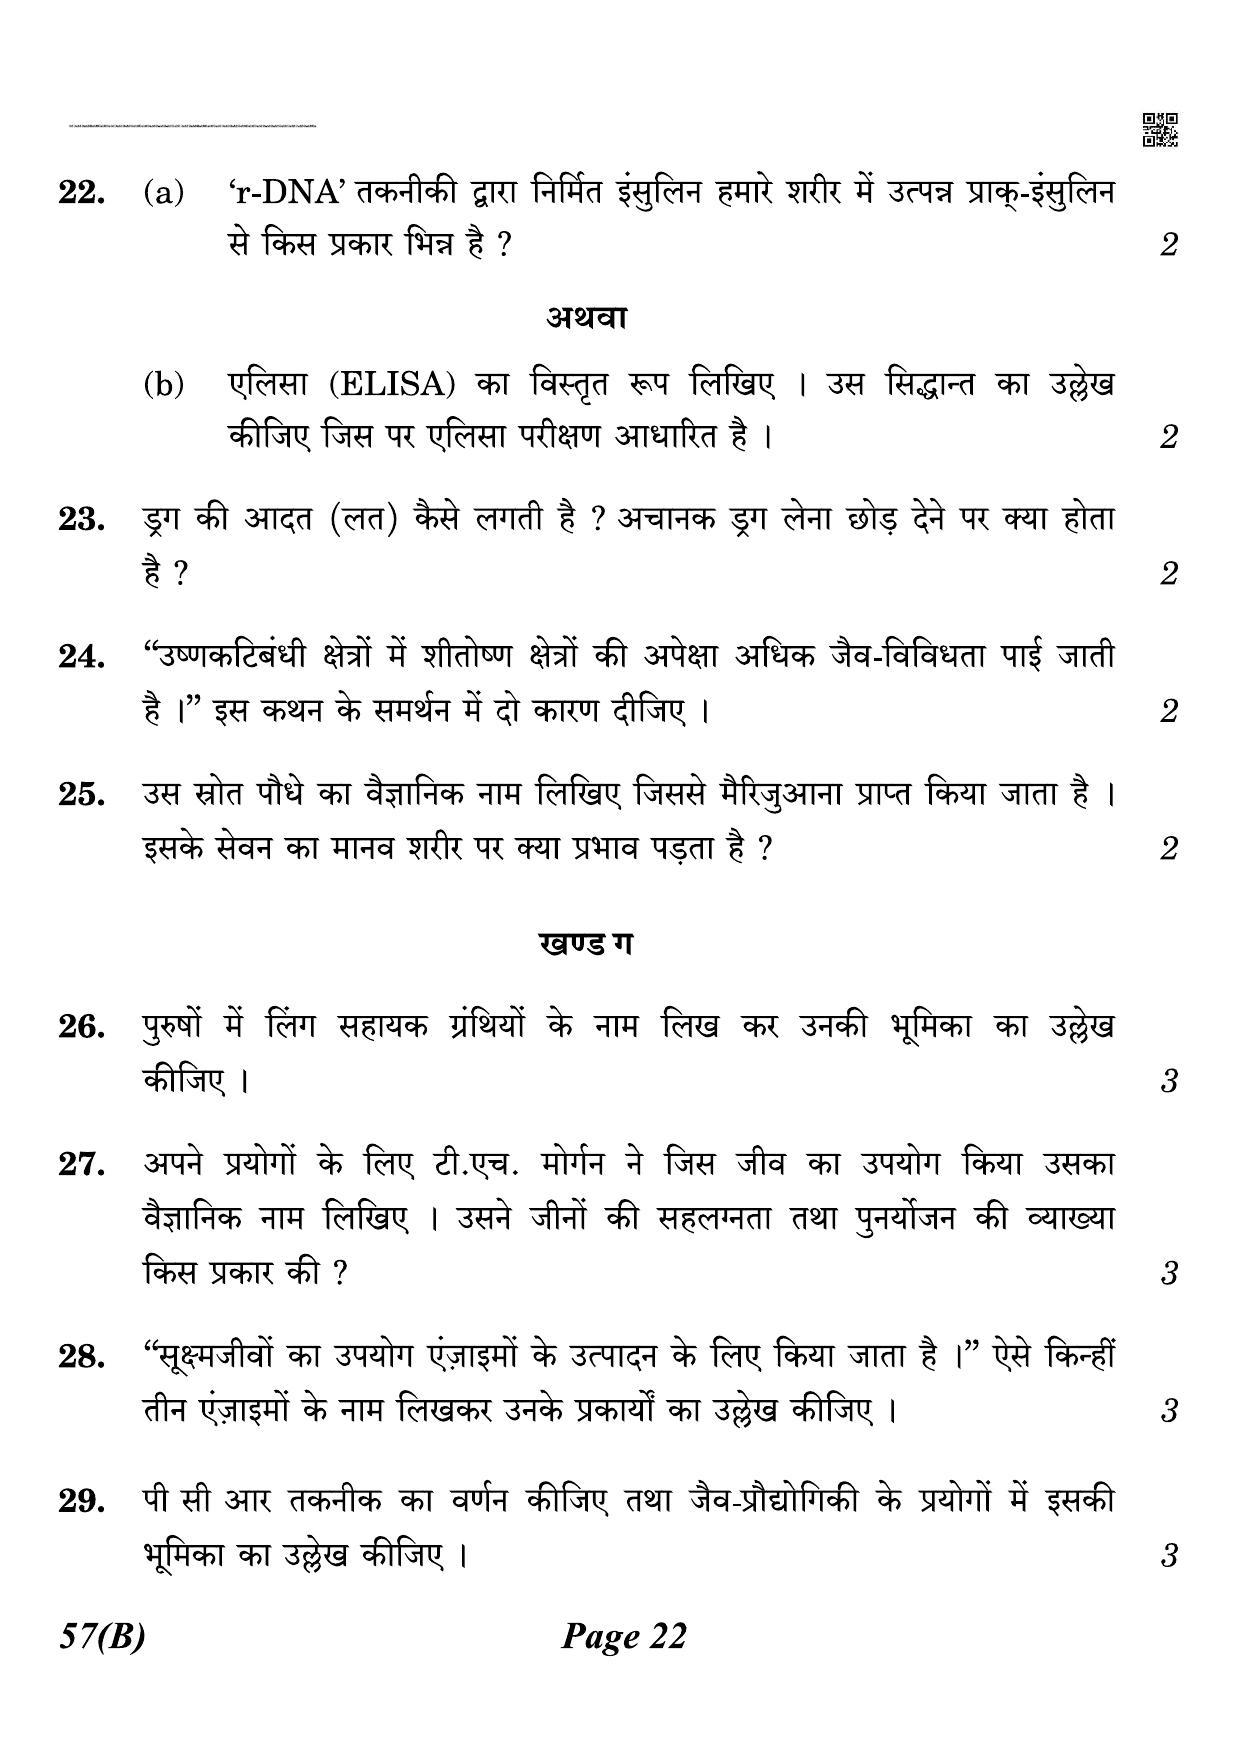 CBSE Class 12 QP_044_biology_for_visually_impared_candidates 2021 Compartment Question Paper - Page 22